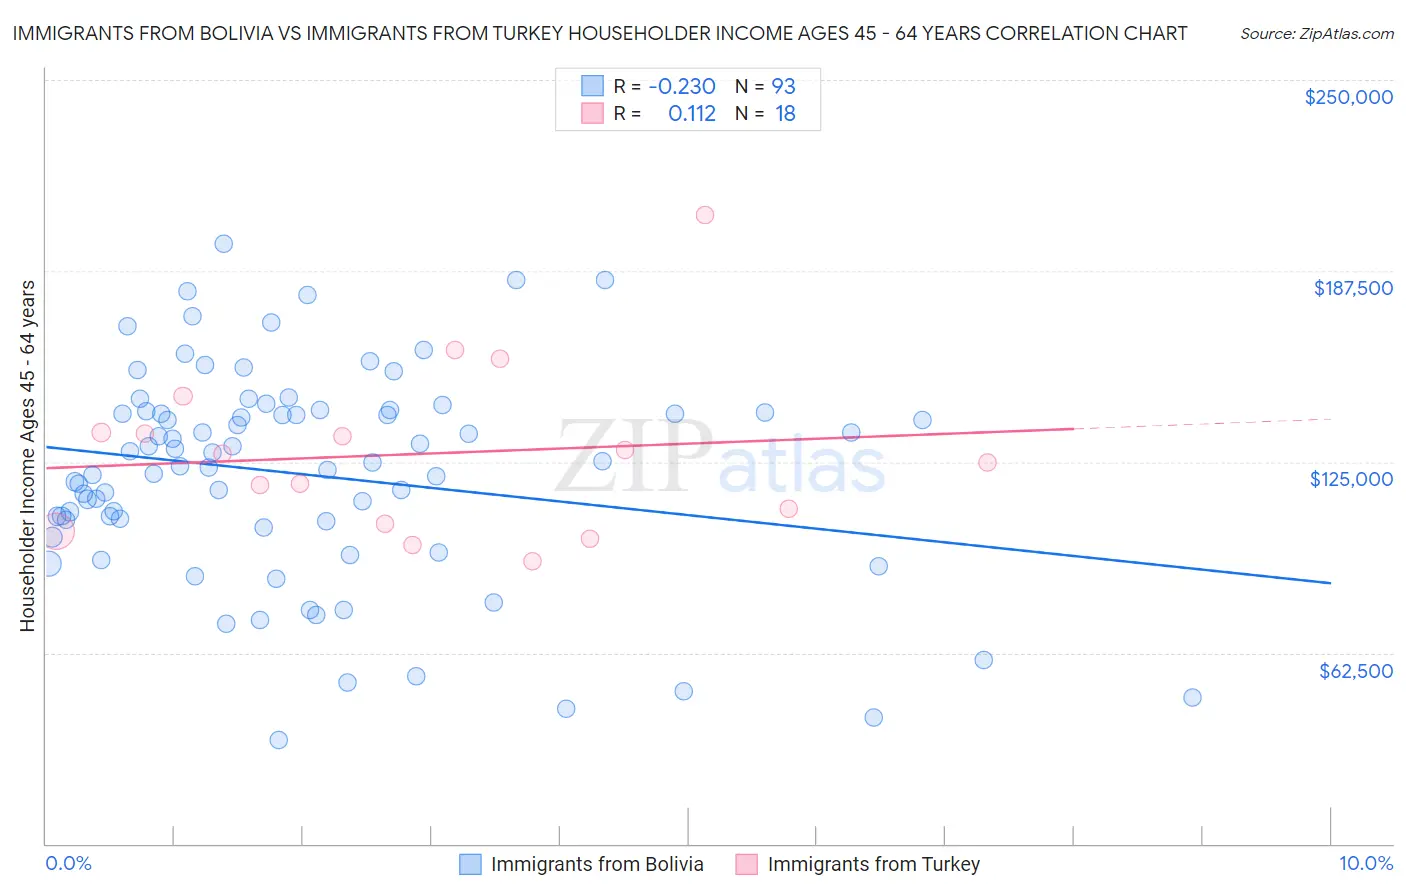 Immigrants from Bolivia vs Immigrants from Turkey Householder Income Ages 45 - 64 years